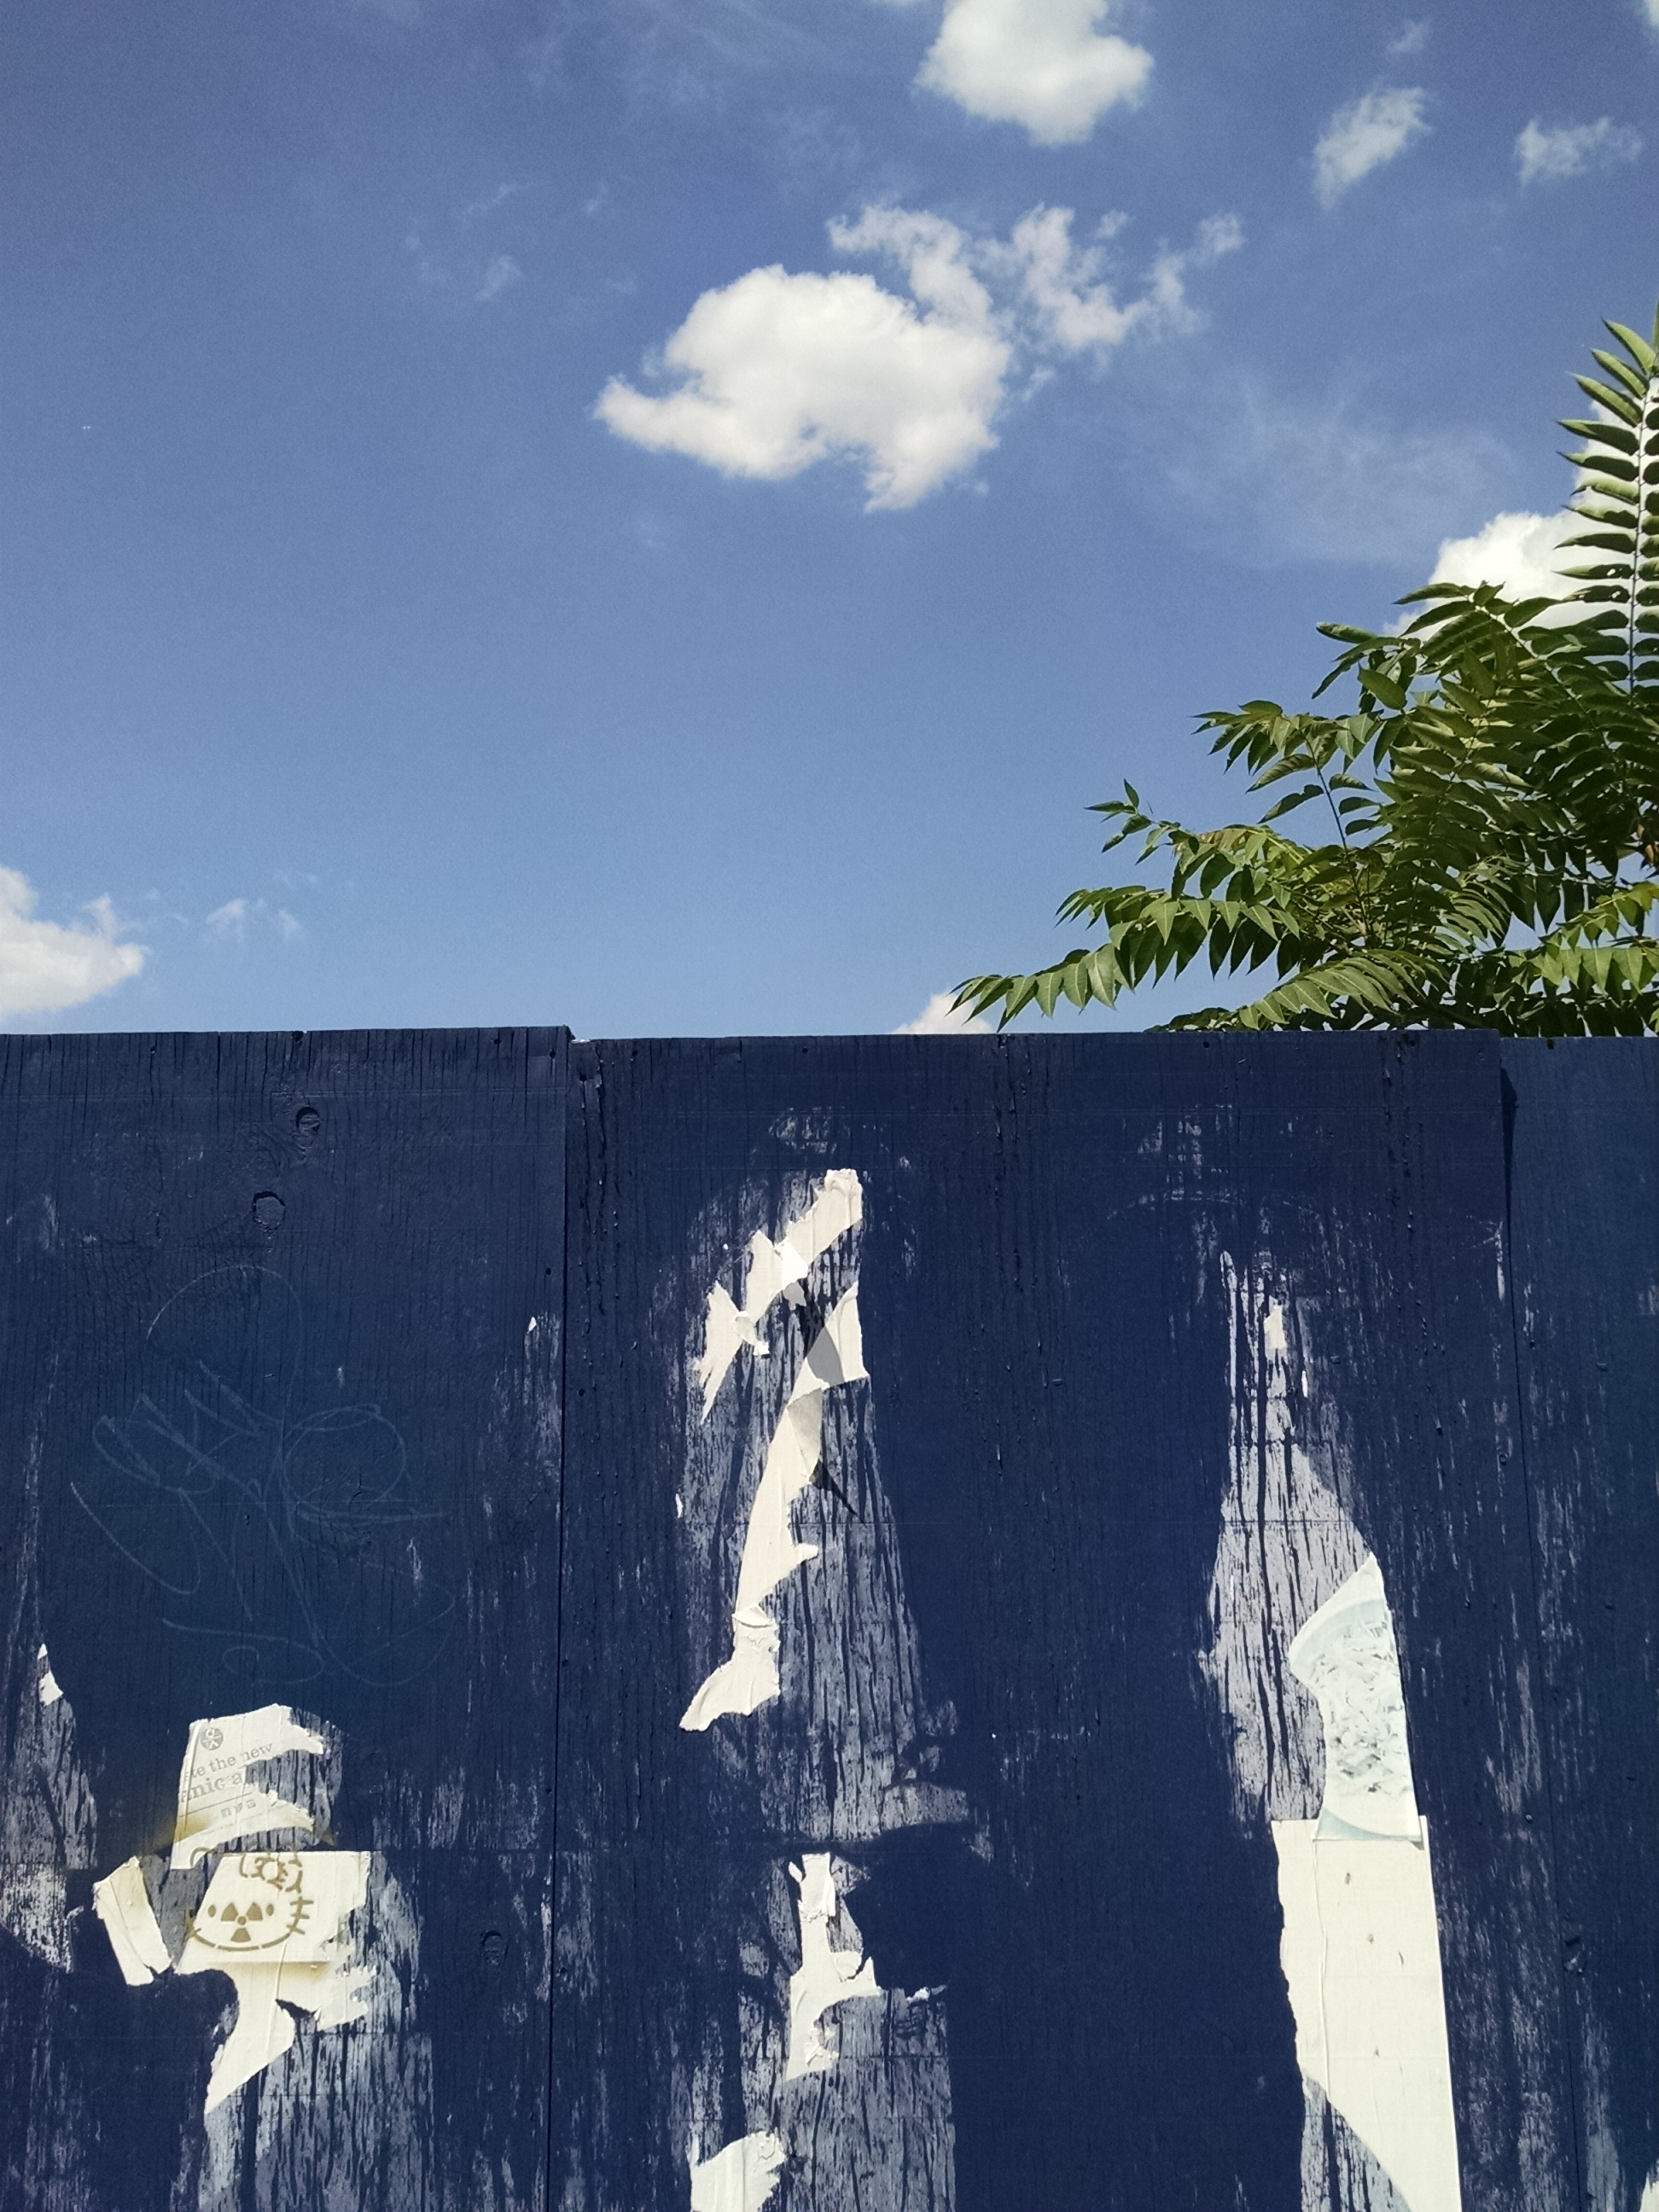 Cover image of sky above a blue fence